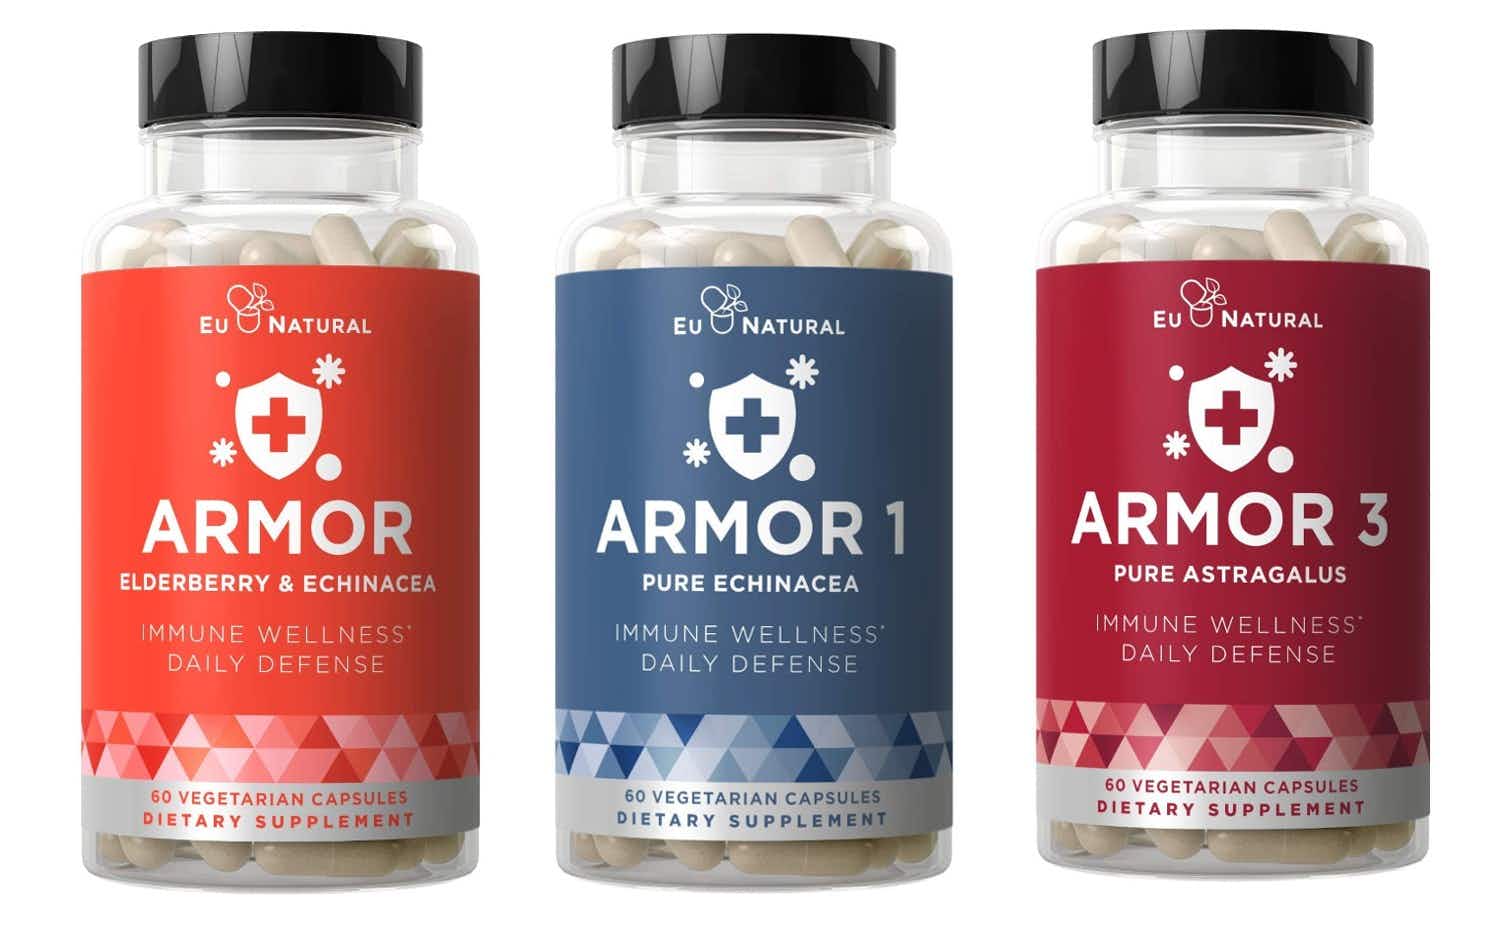 A set of three Eu Natural Armor supplement containers.